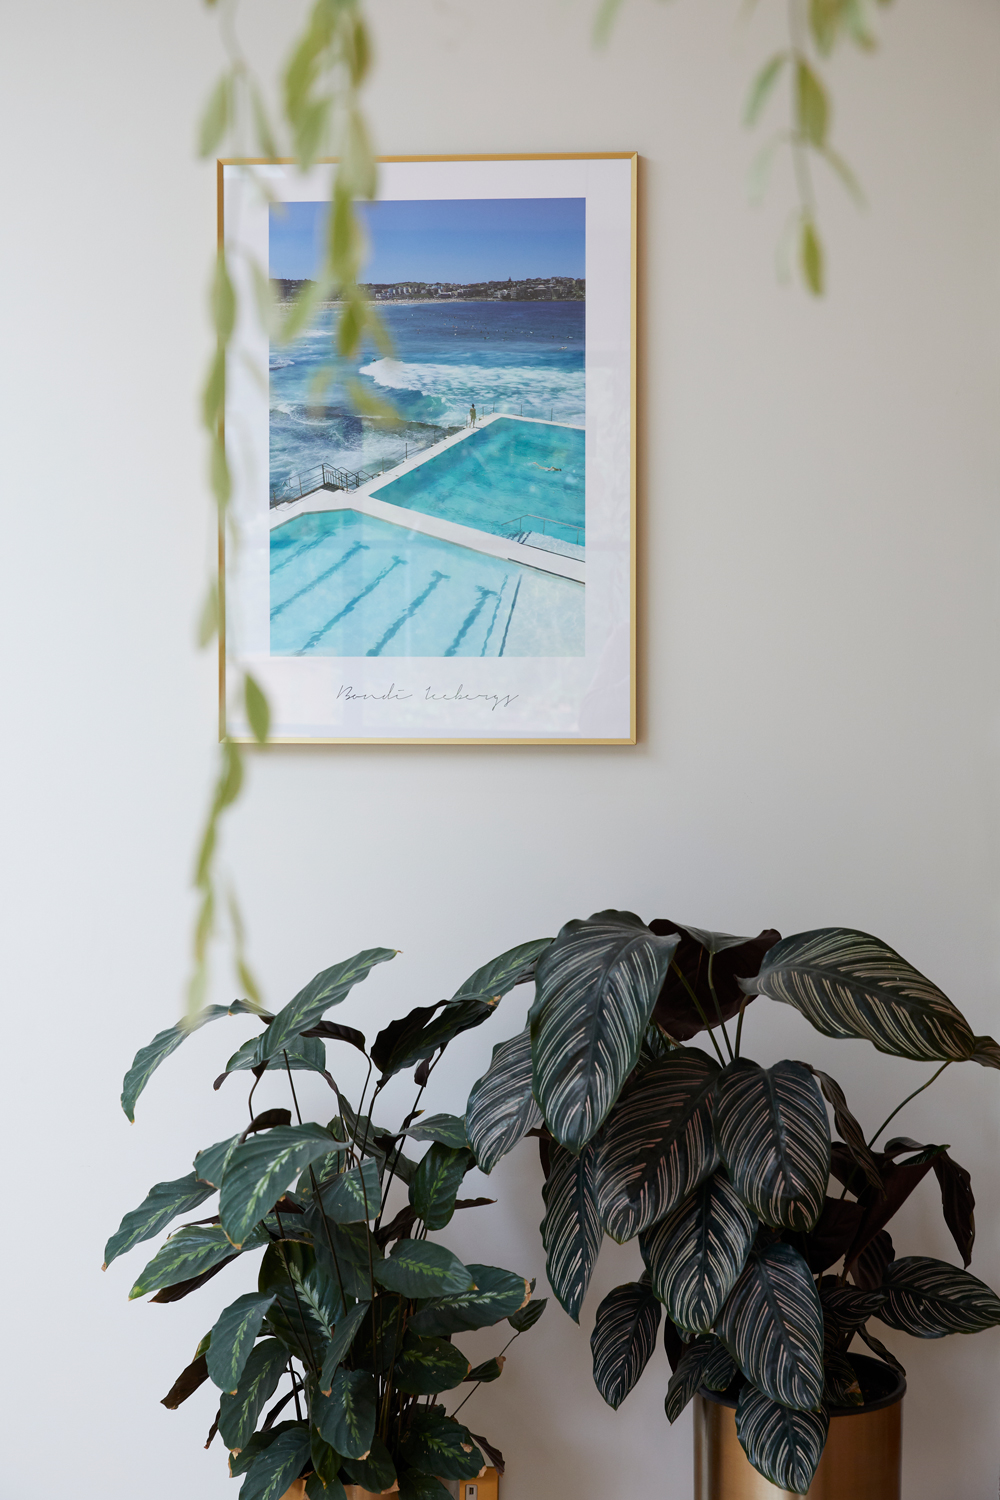 Swimming pool picture hangs on wall with floor standing planters